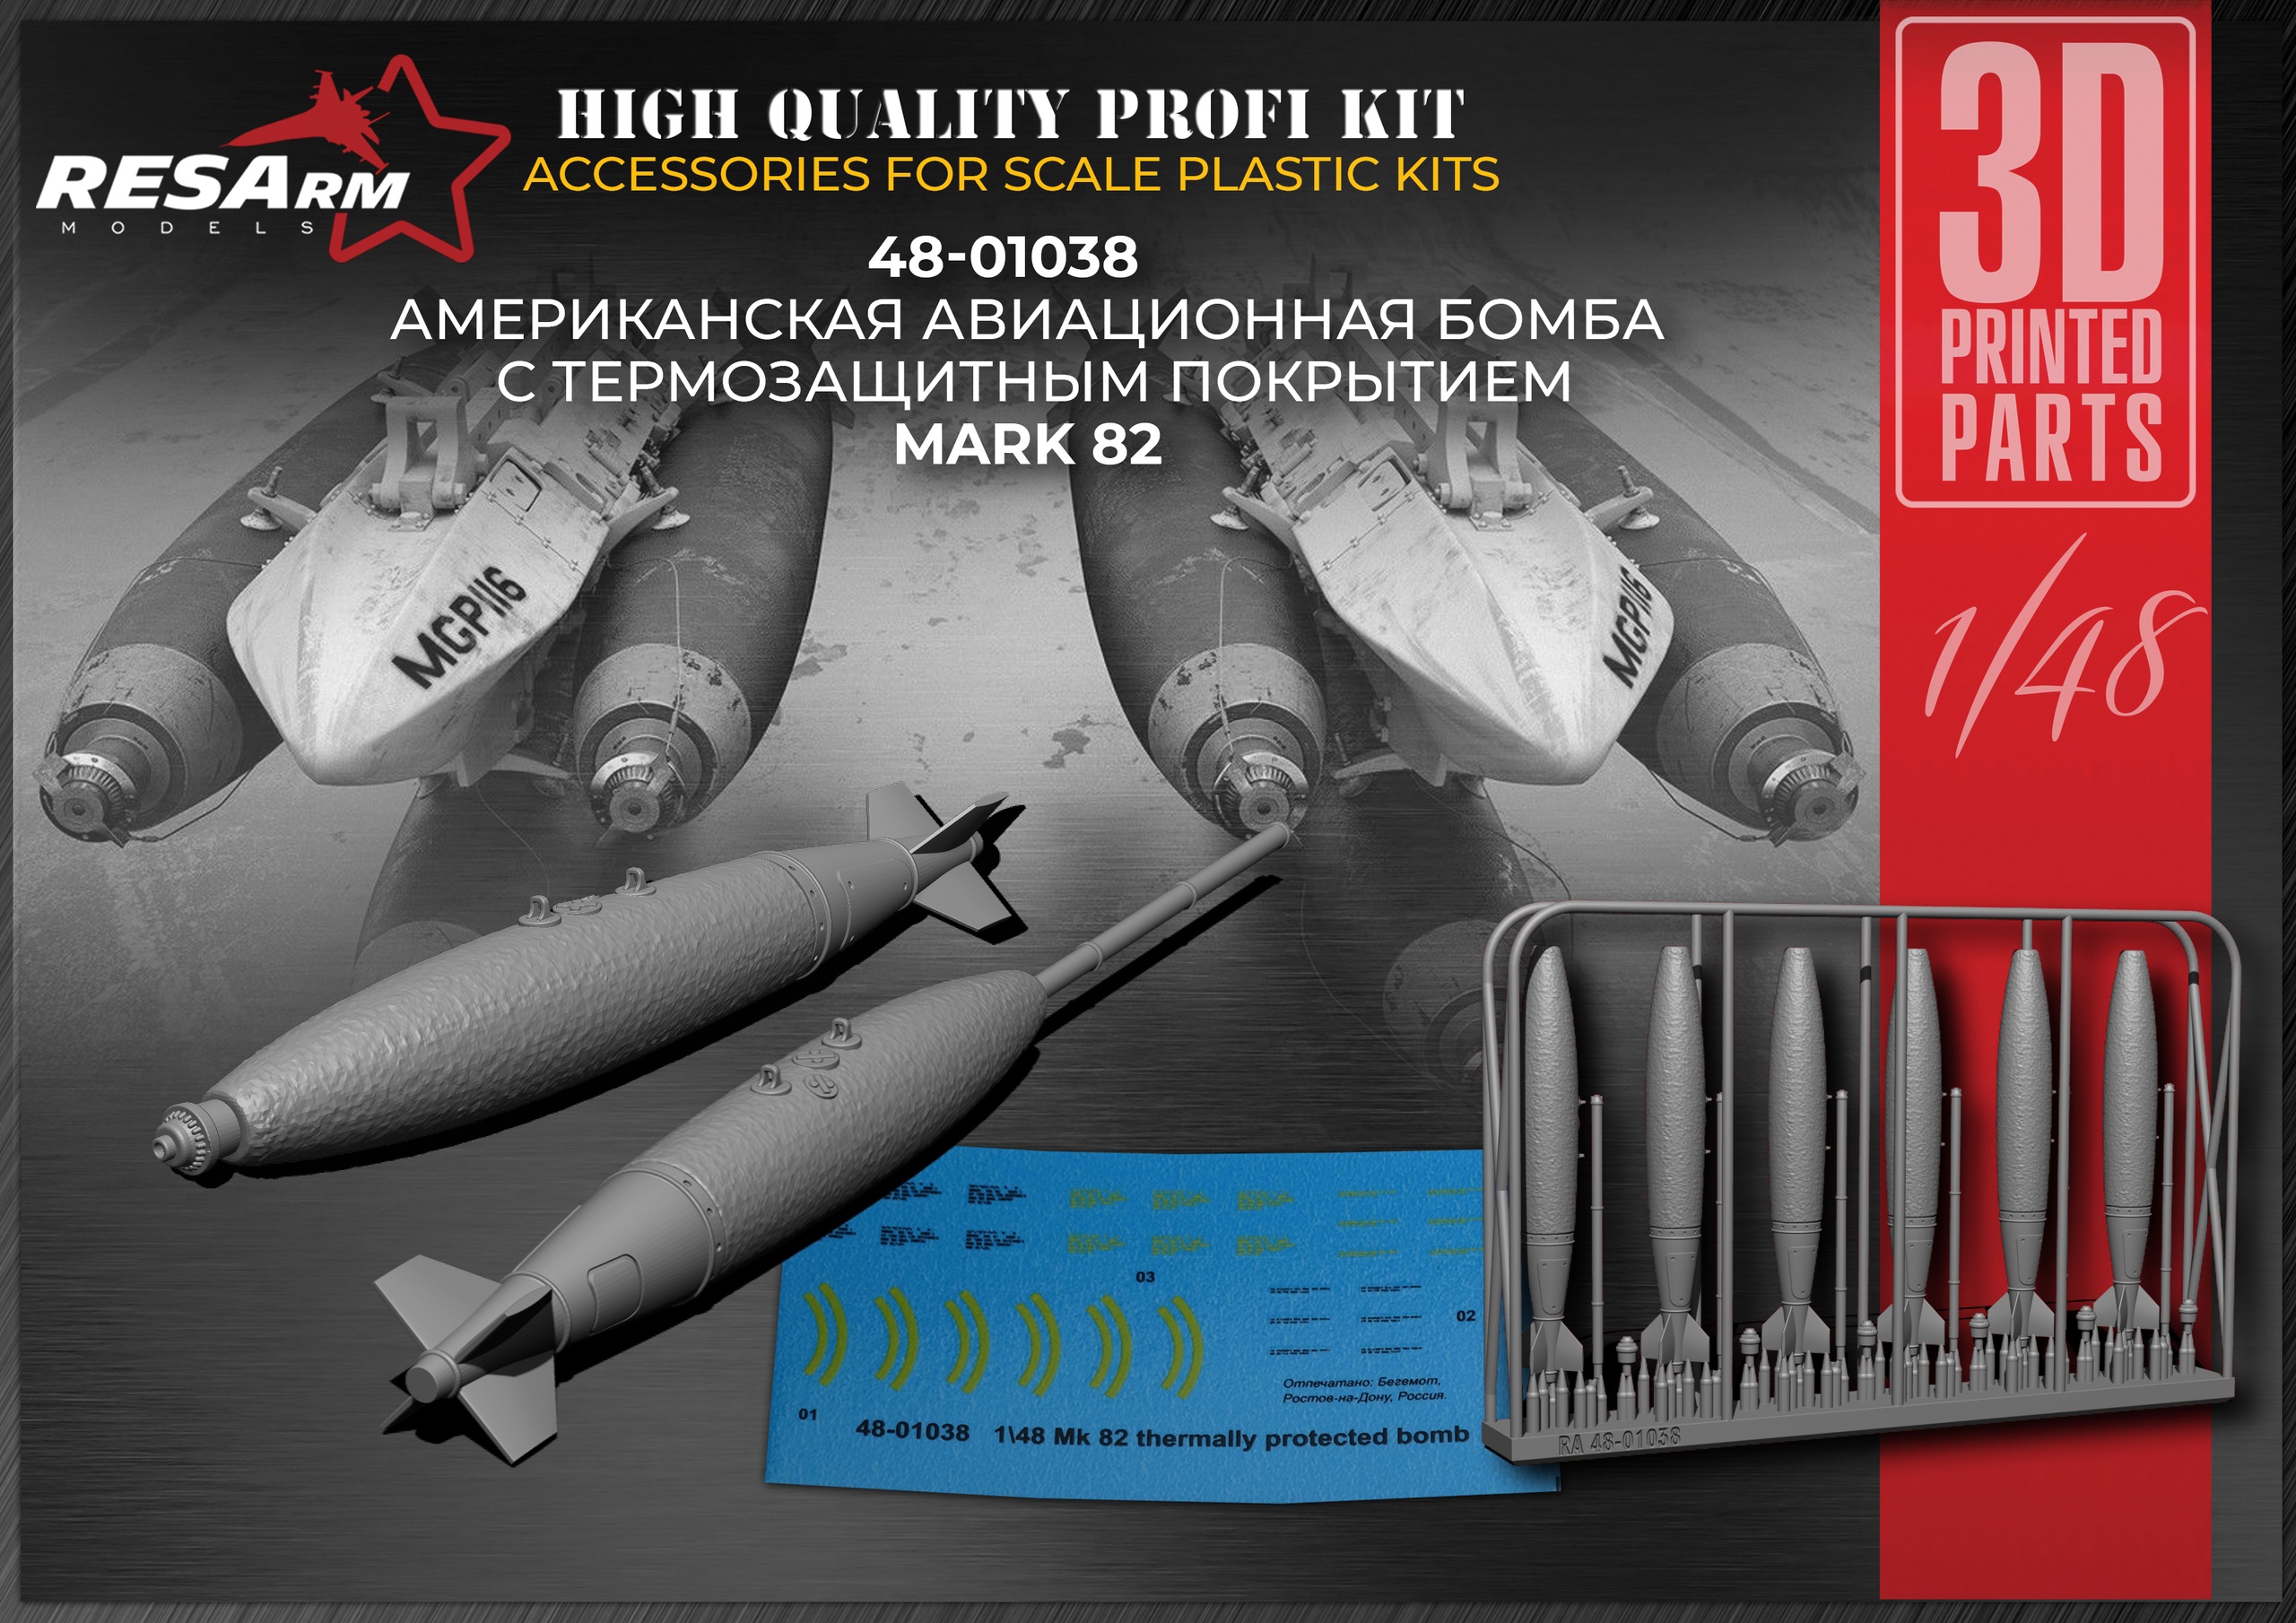 Additions (3D resin printing) 1/48 Mark-82 • US aircraft bomb with thermal protective coating (RESArm)